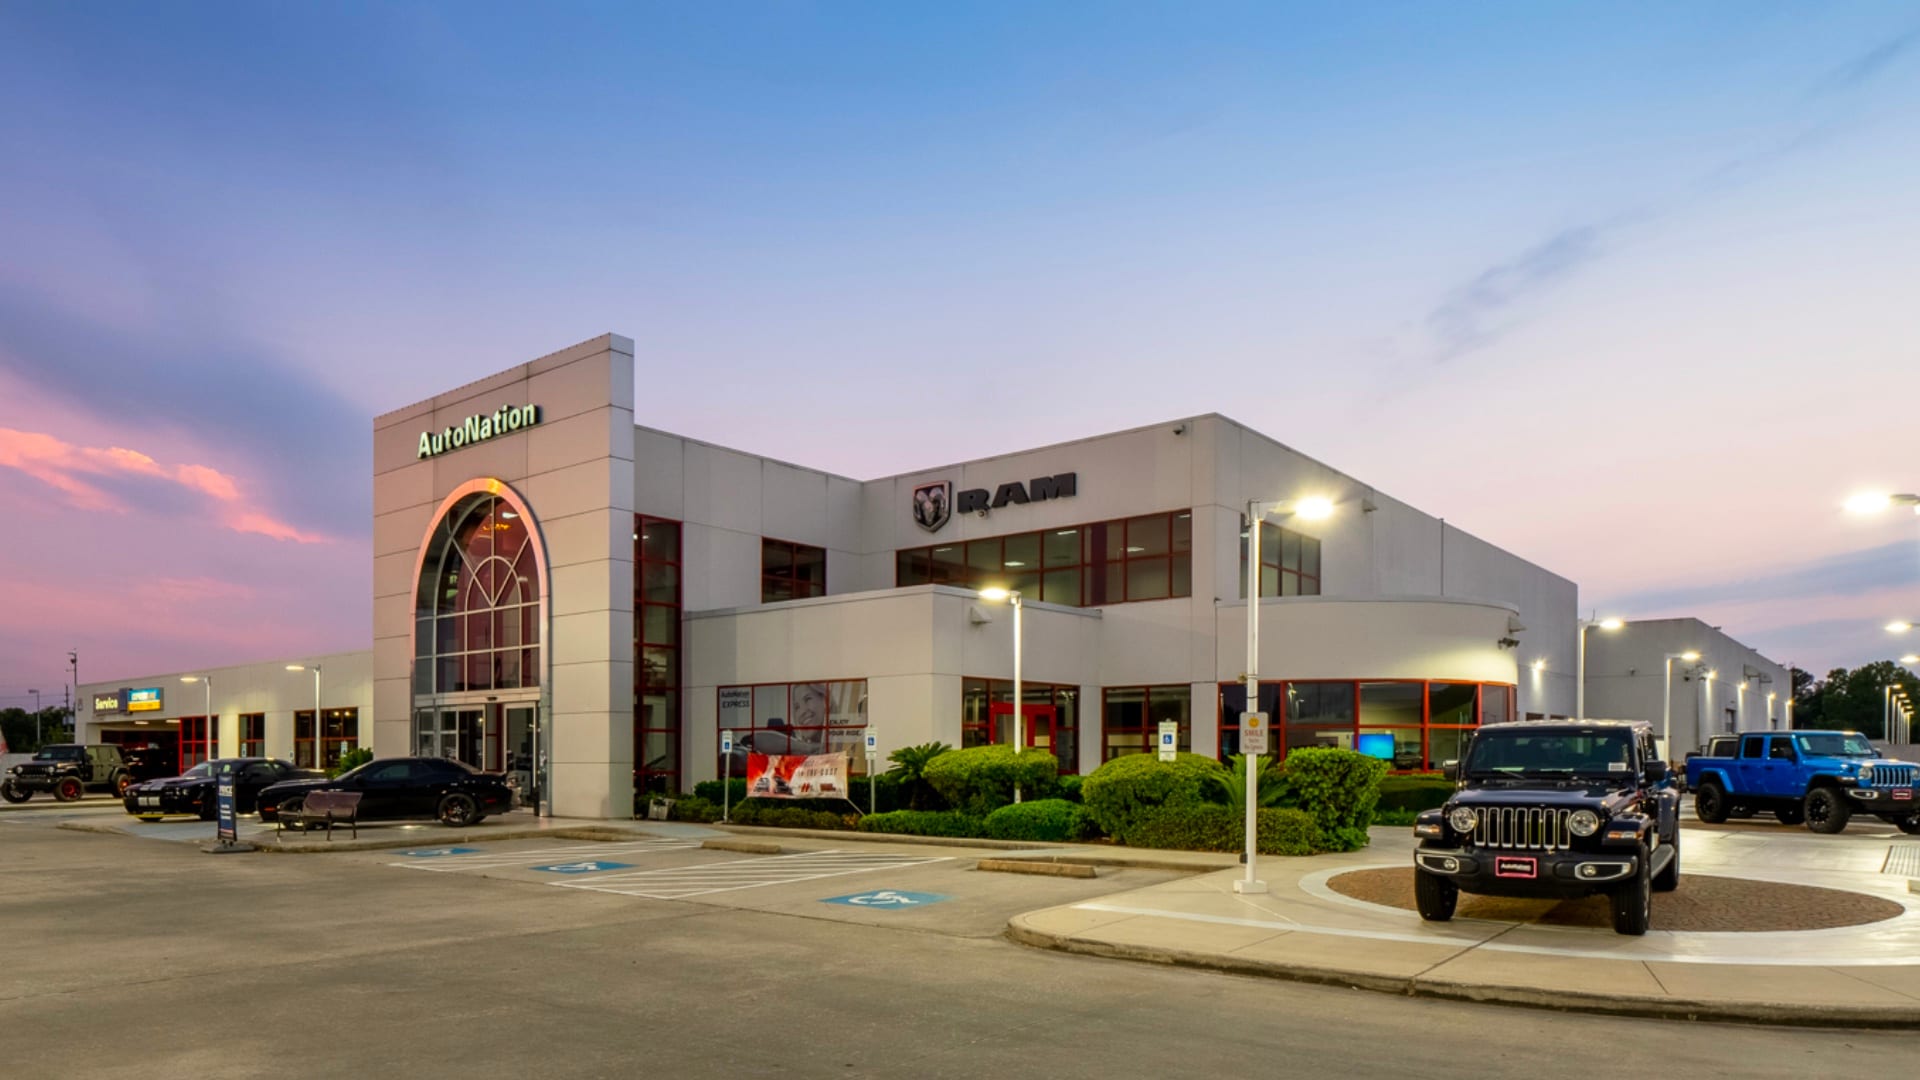 Exterior view of AutoNation Chrysler Dodge Jeep Ram Spring during a sunrise or sunset. Many vehicles parked near the grey building. Trees and greenery are visible around the parking lot and surrounding area.